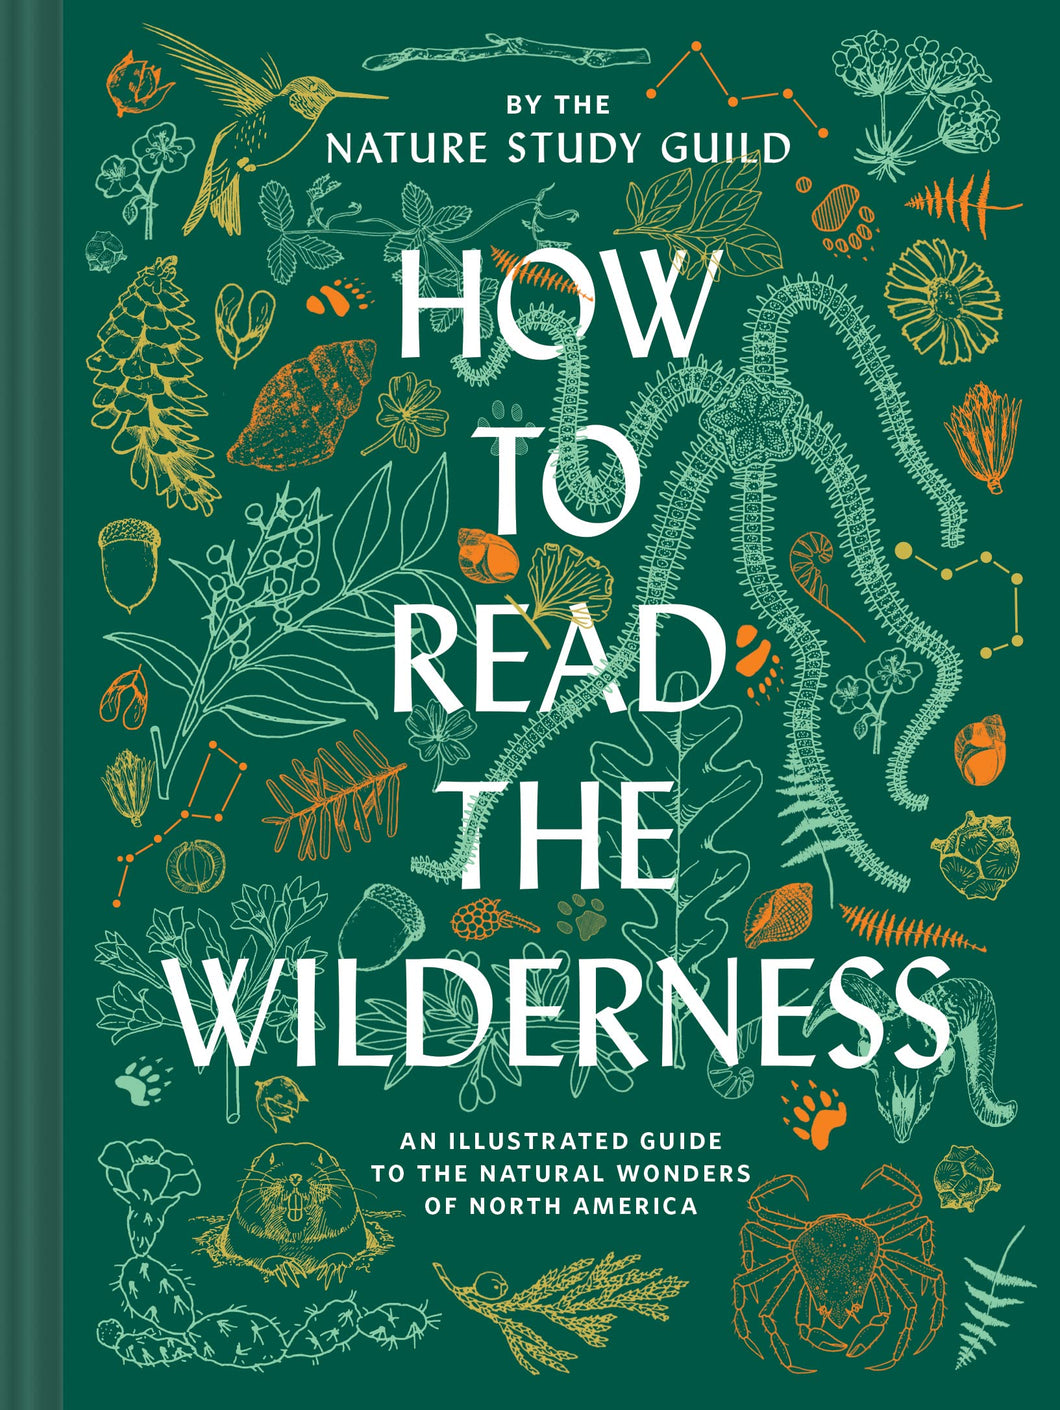 How To Read The Wilderness [Nature Study Guide]